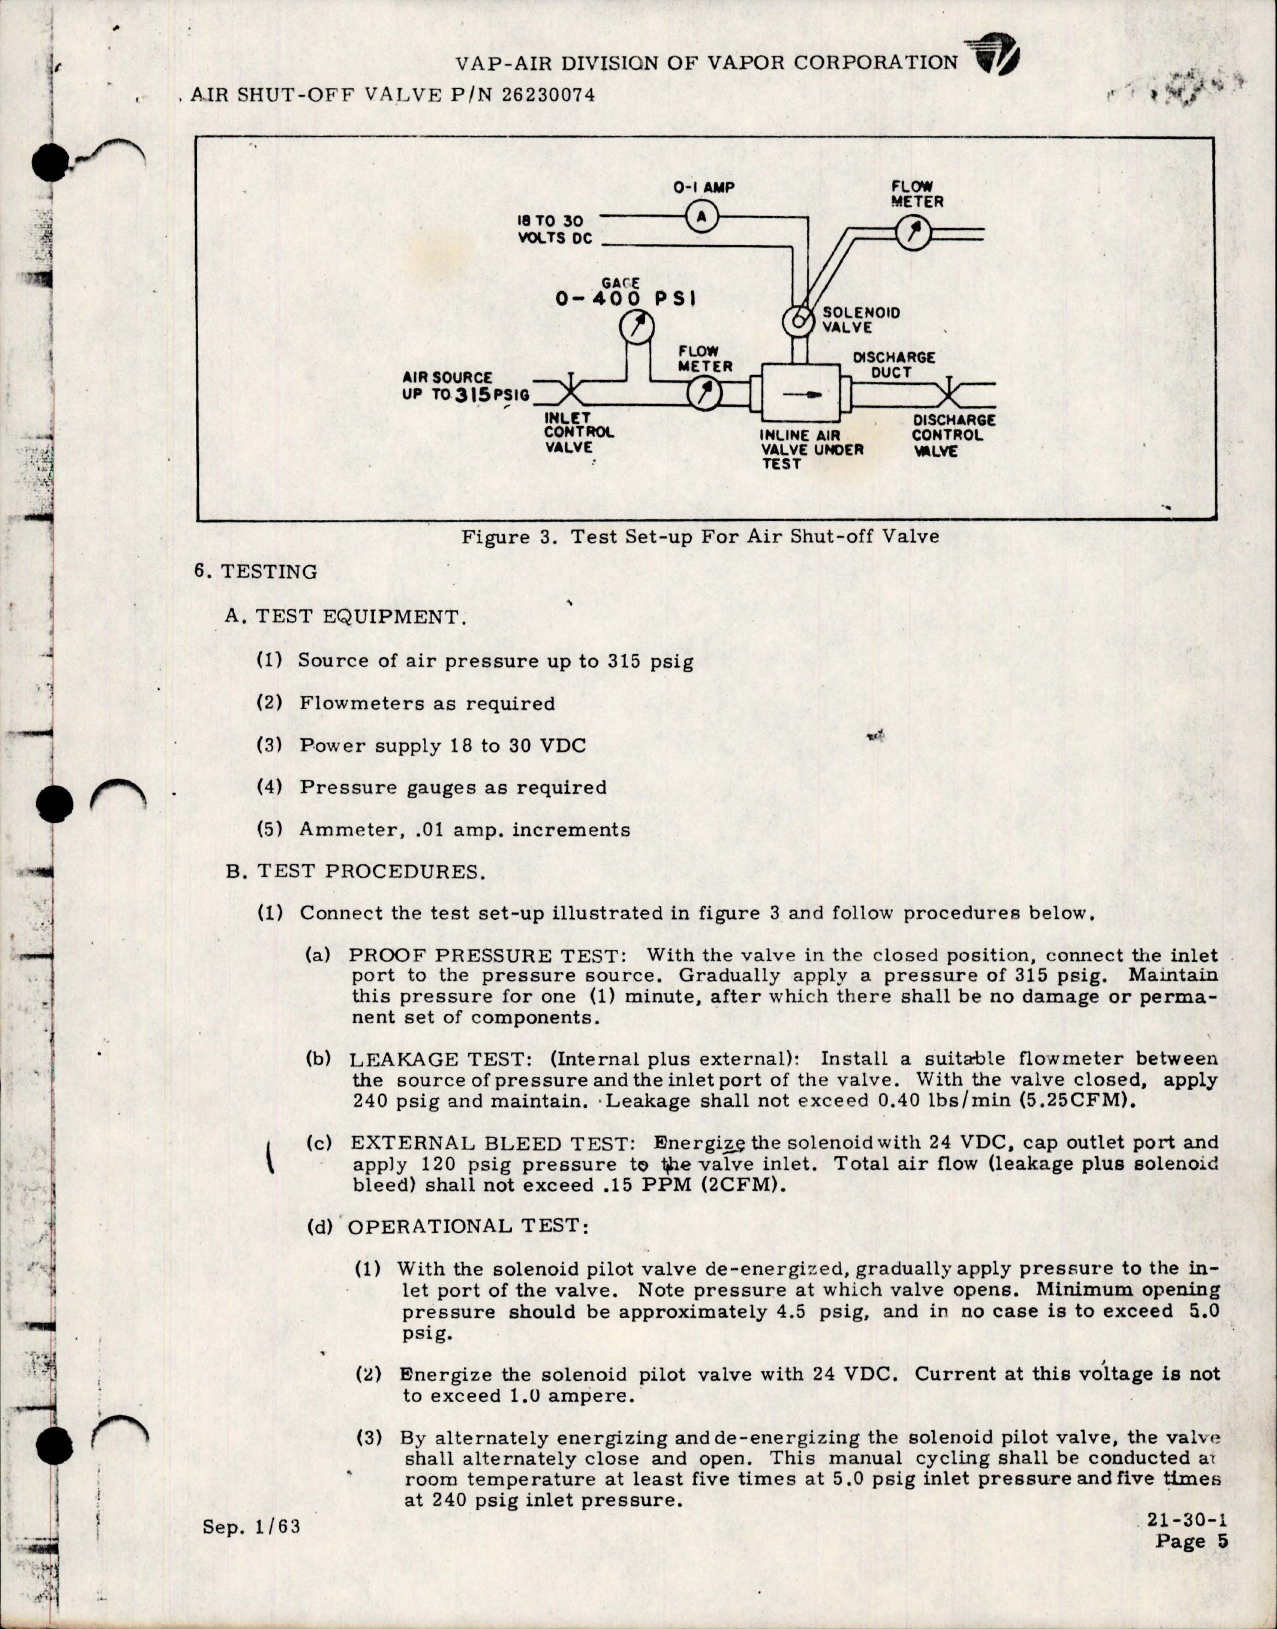 Sample page 5 from AirCorps Library document: Maintenance, Wiring Diagram, Overhaul Manual with Parts for Air Shut Off Valve - Part 26230074 